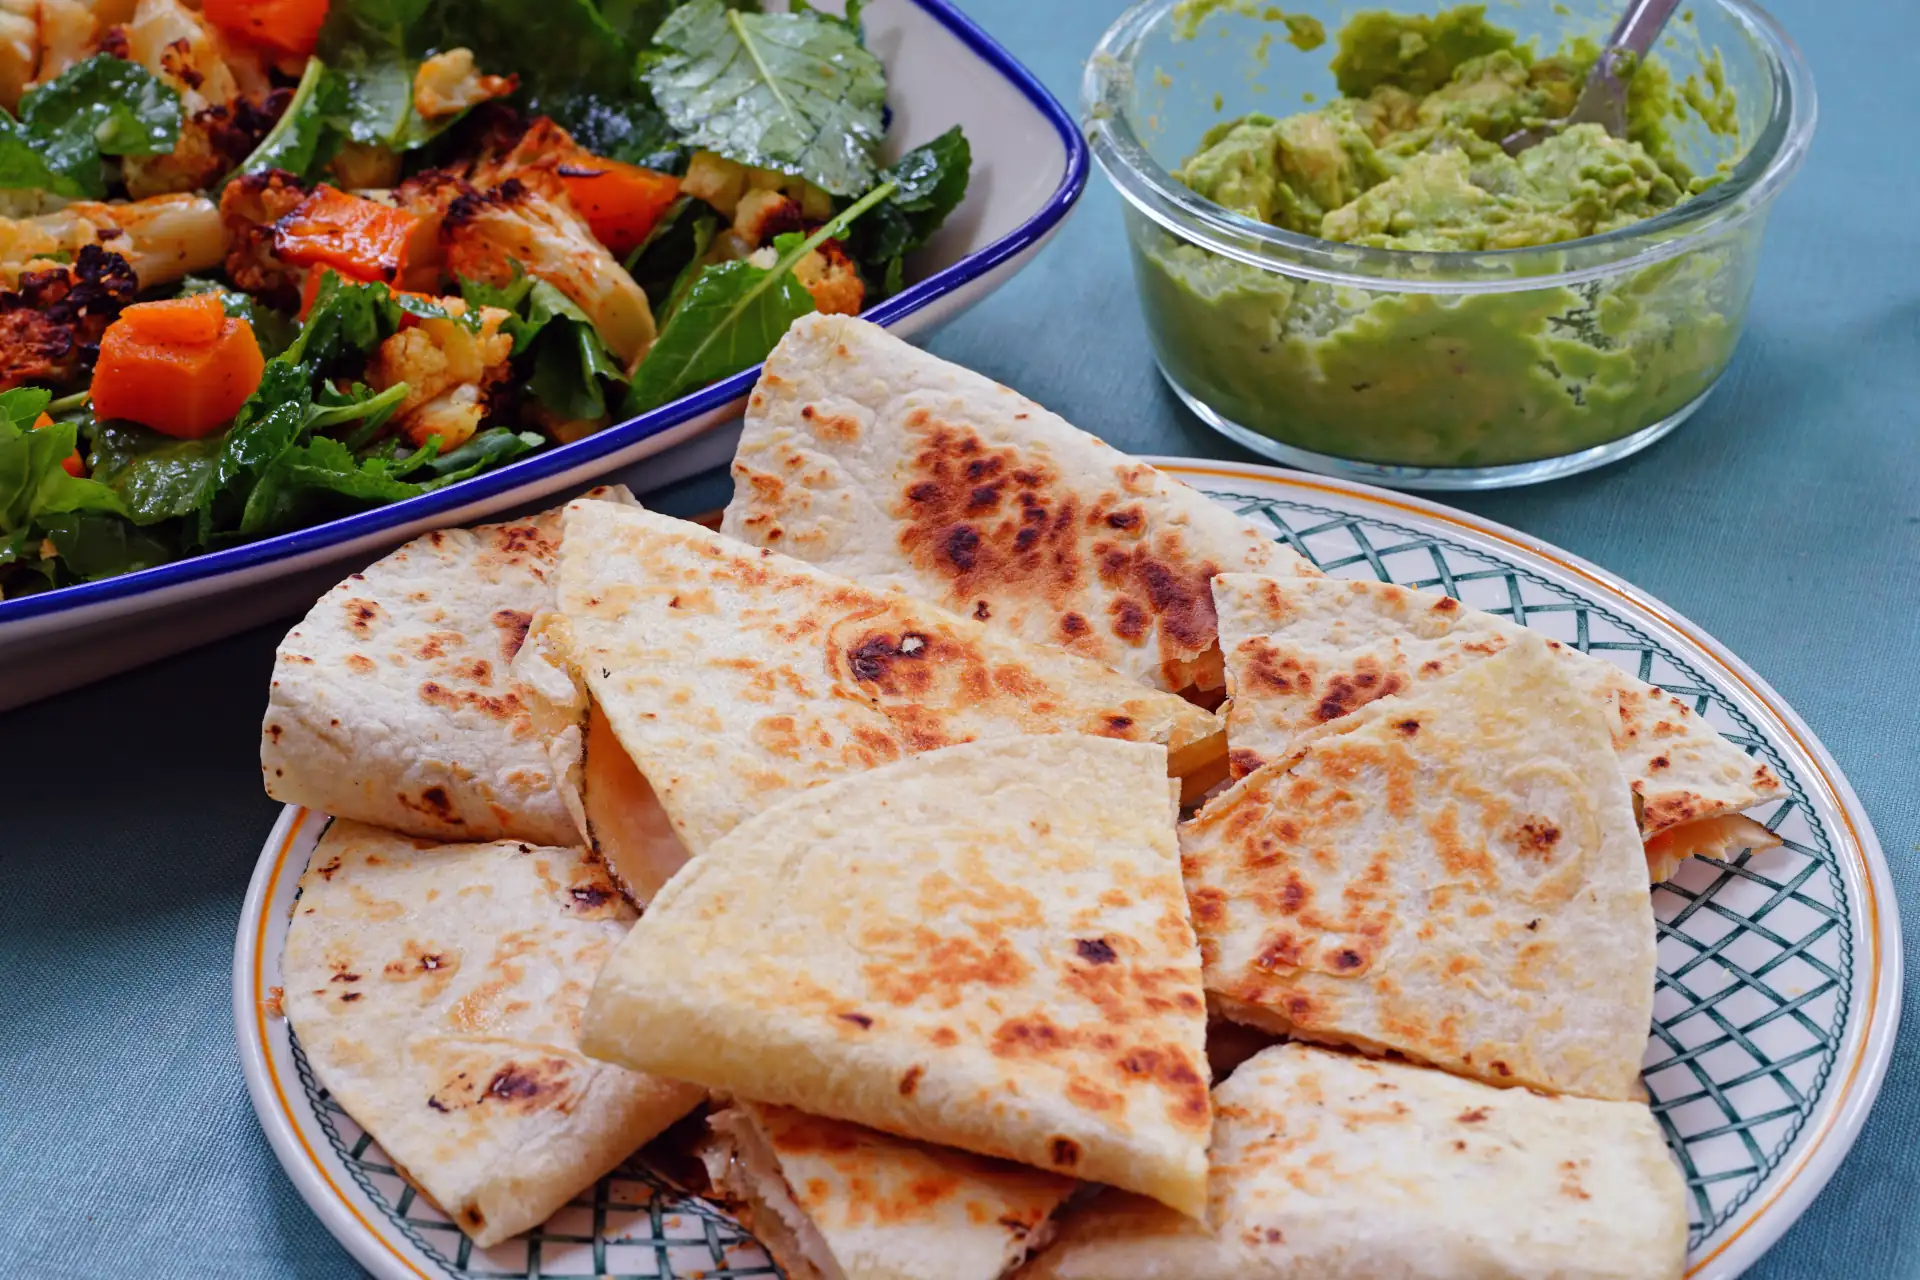 Plate of quesadillas with salad and guacamole